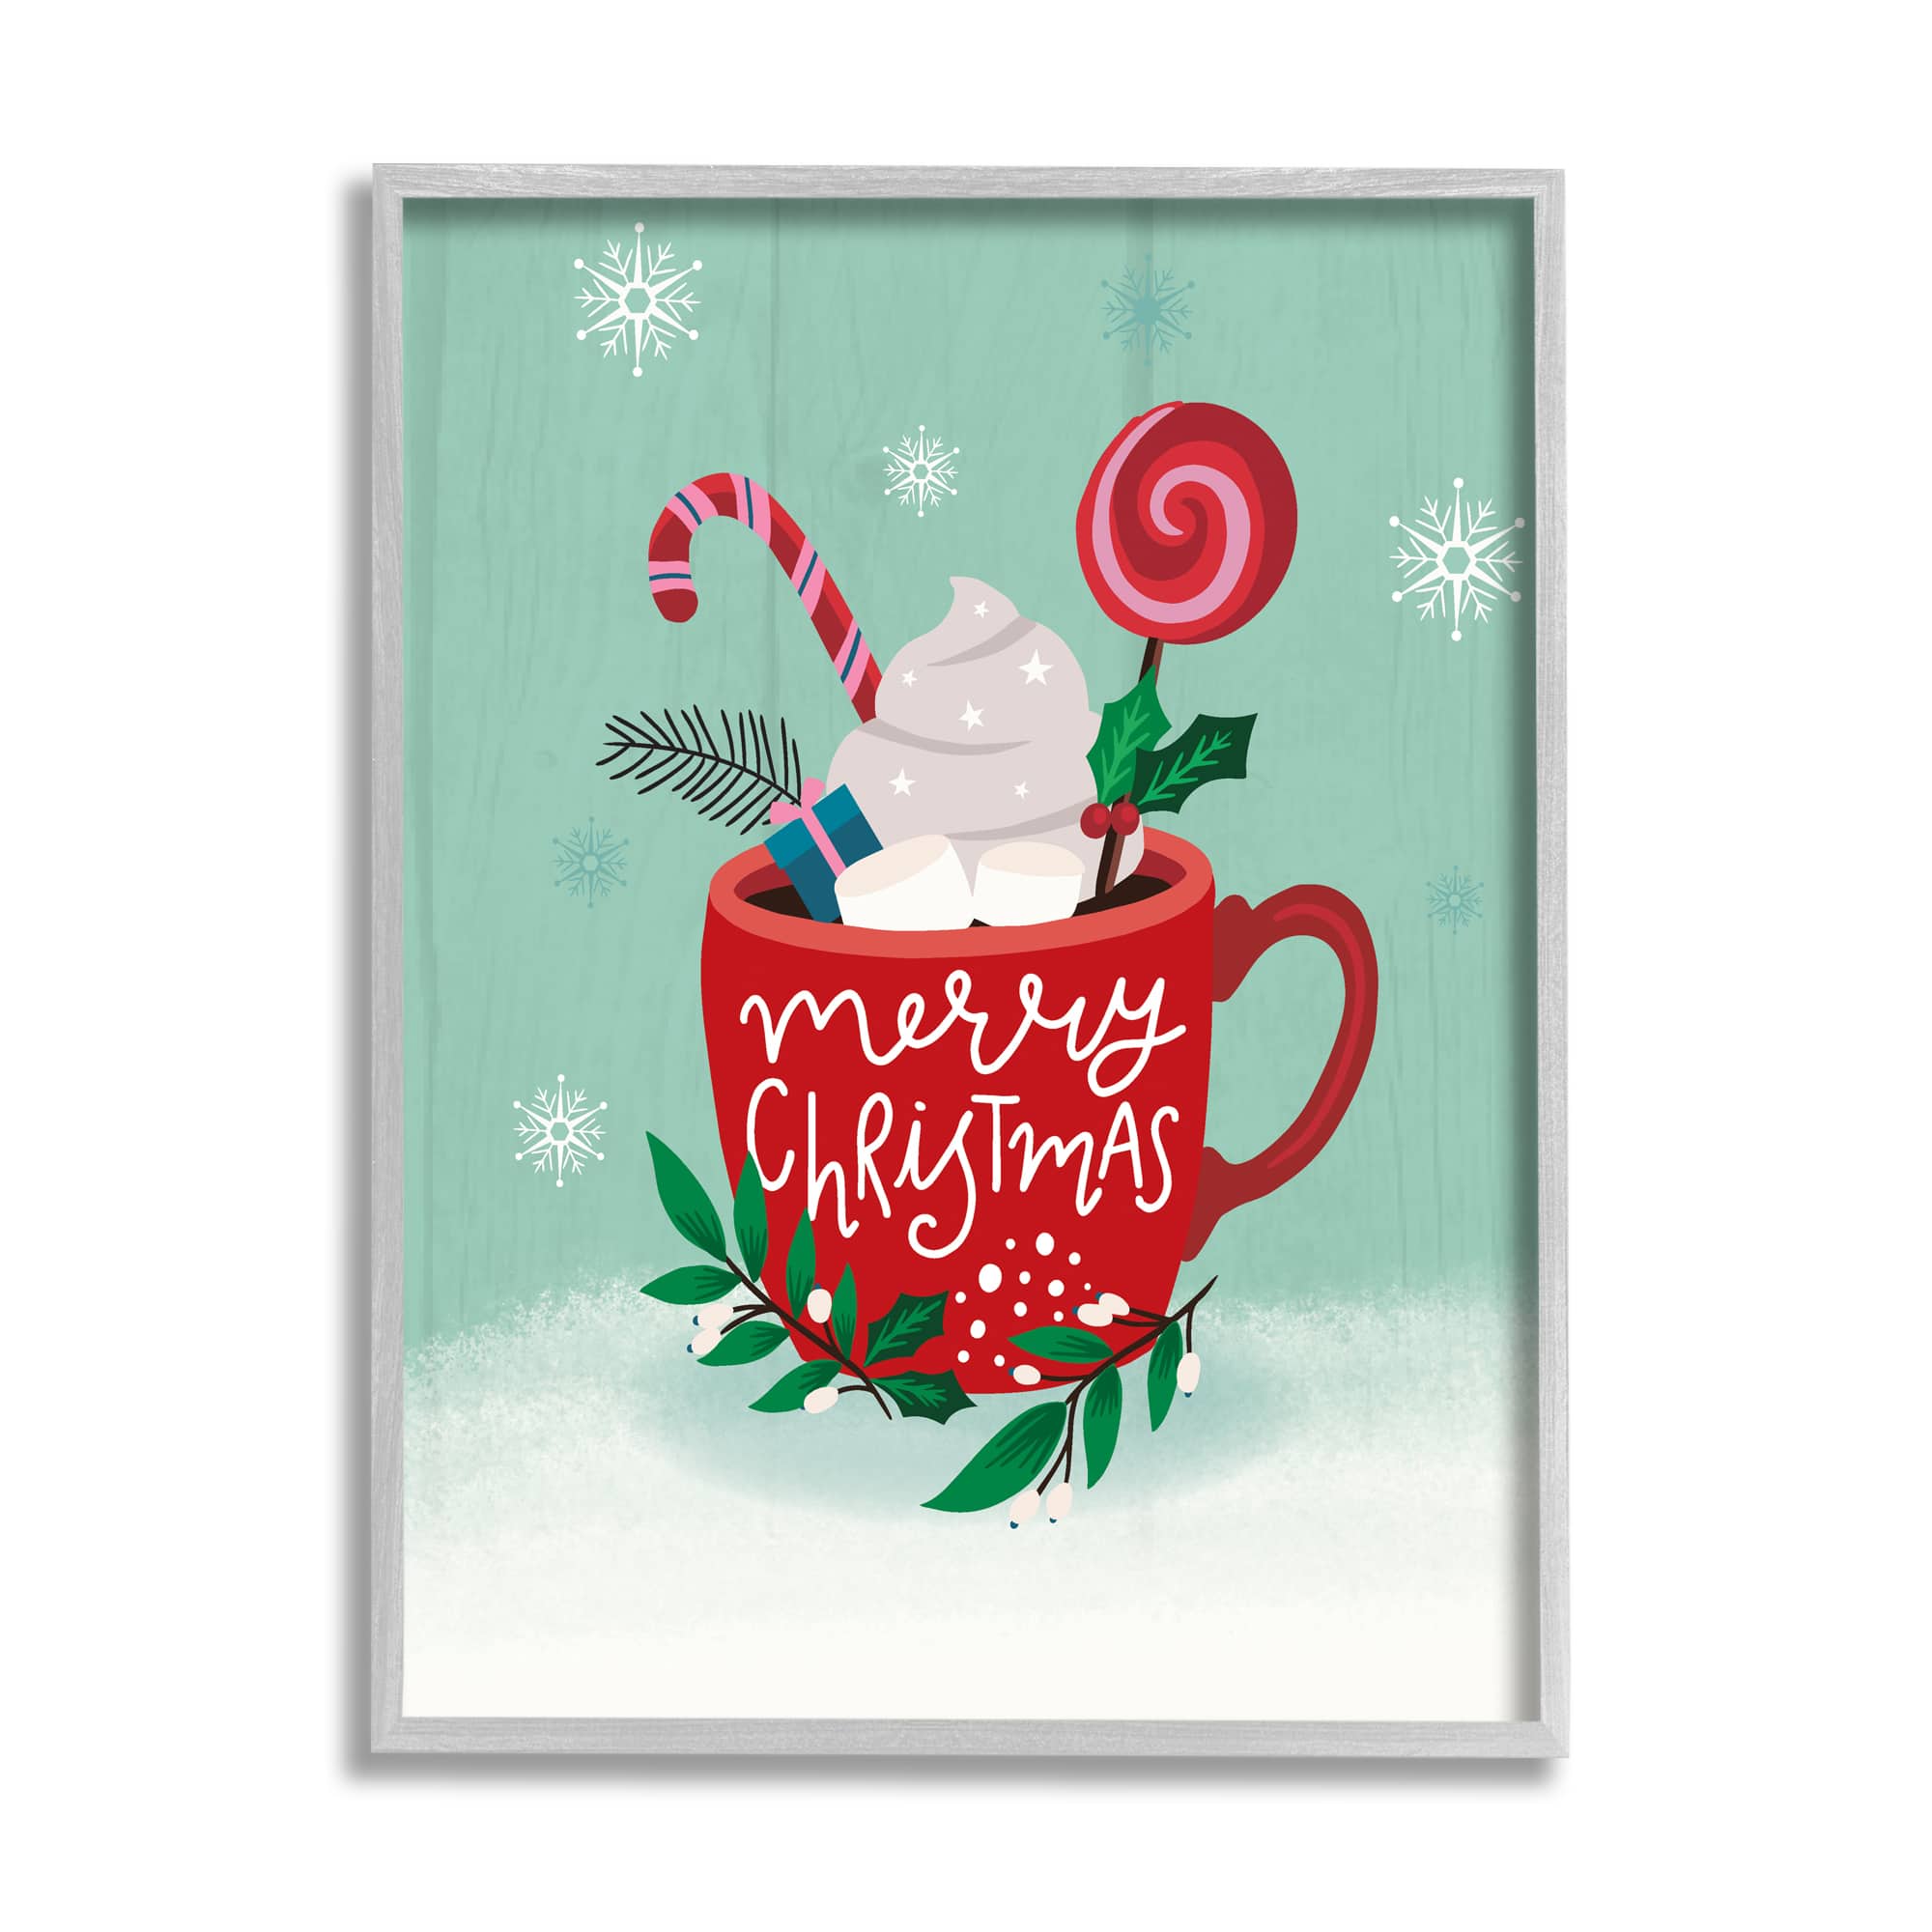 Stupell Industries Merry Christmas Warm Cocoa Framed Giclee Art